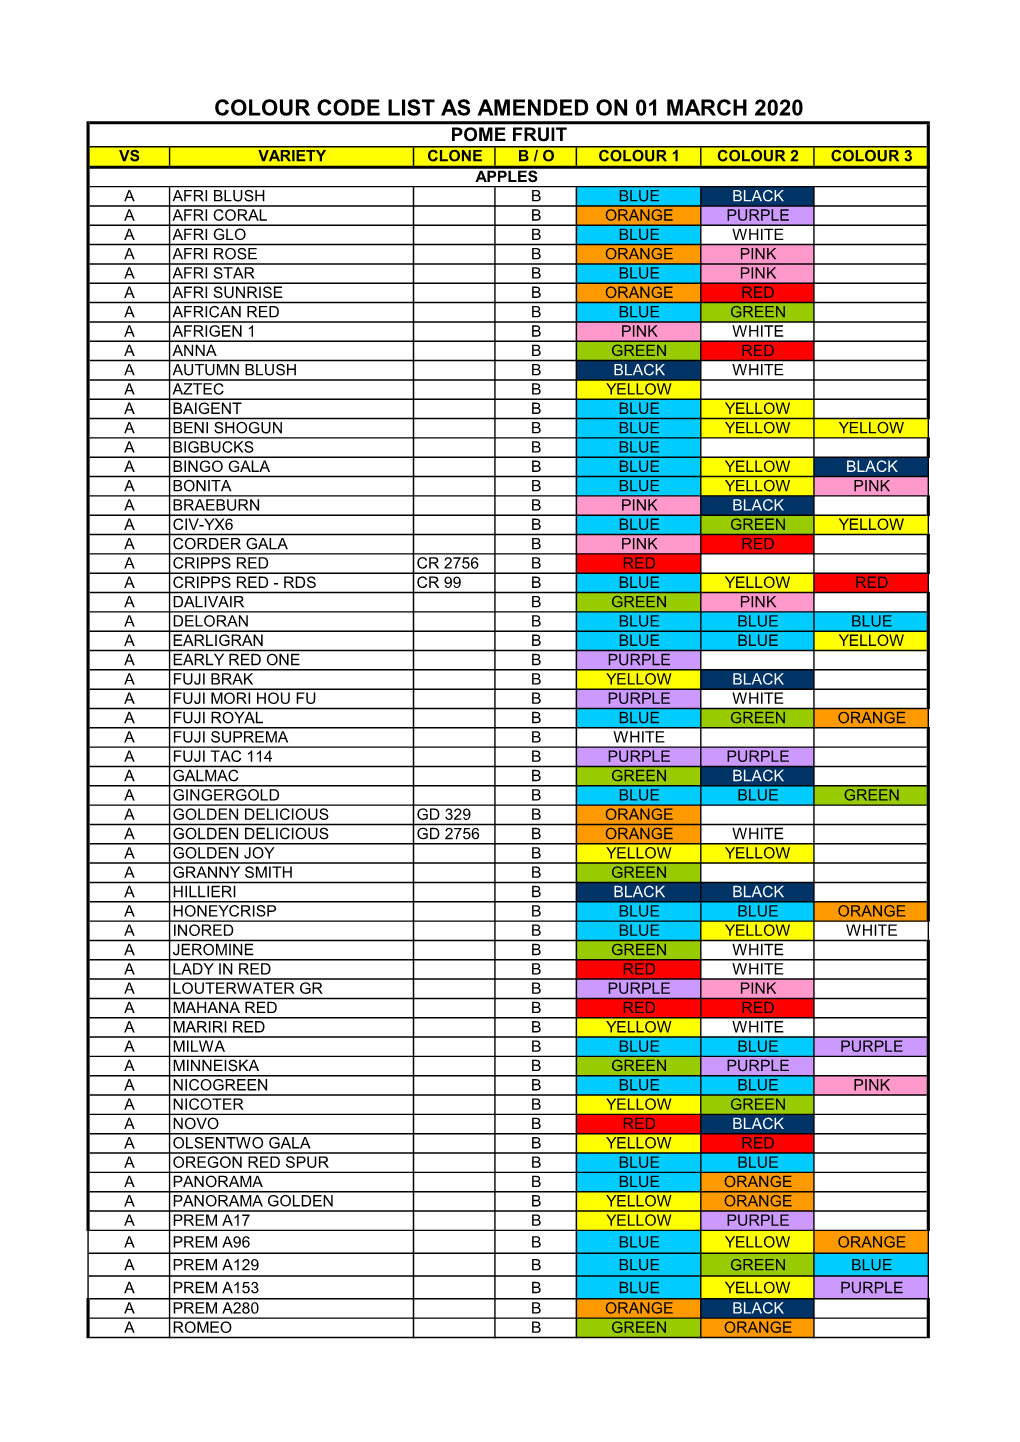 Colour Code List As Amended on 01 March 2020